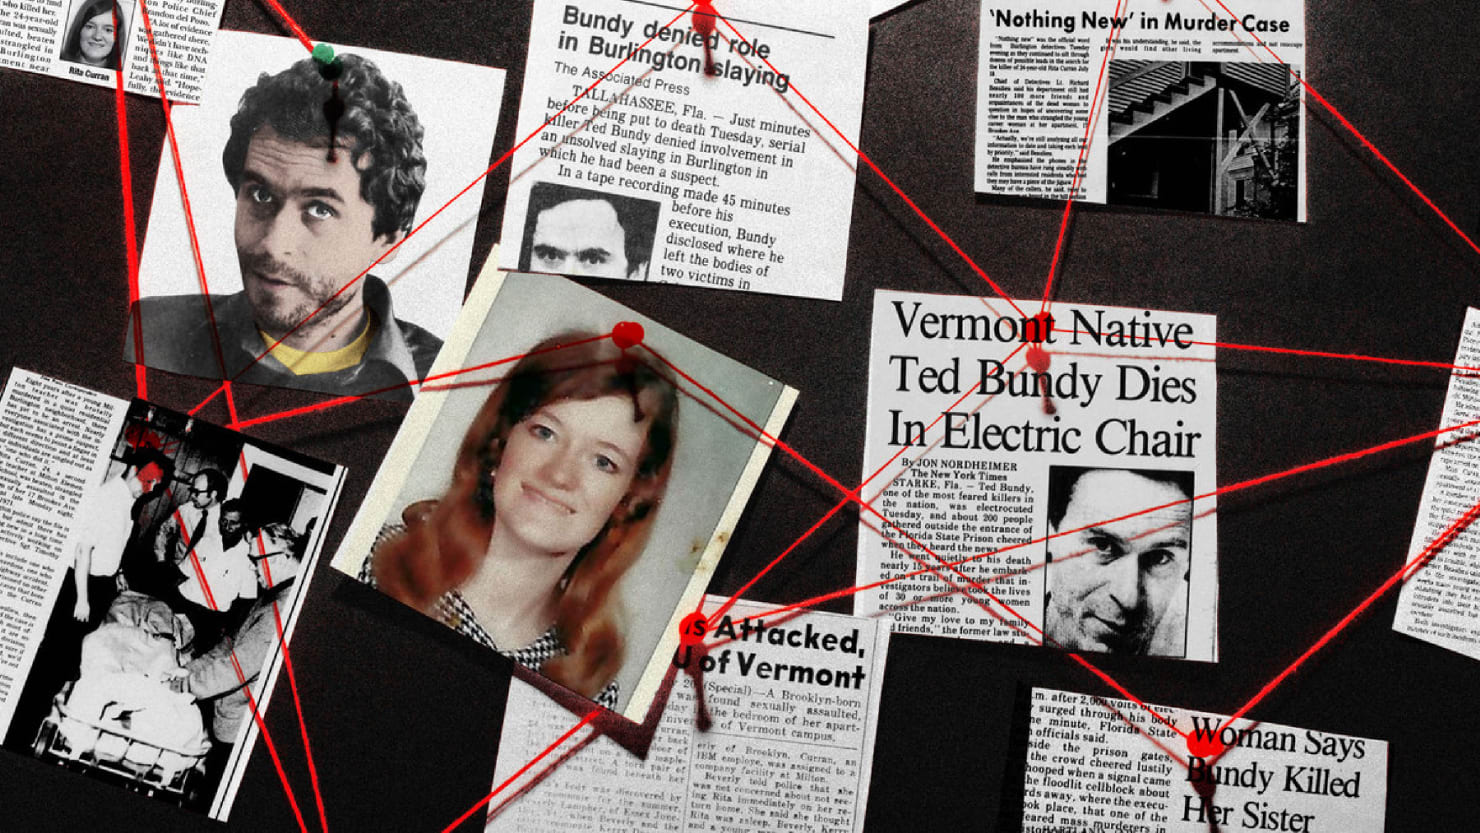 Her Murder Was Tied to Ted Bundy. Then the Case Went Cold.